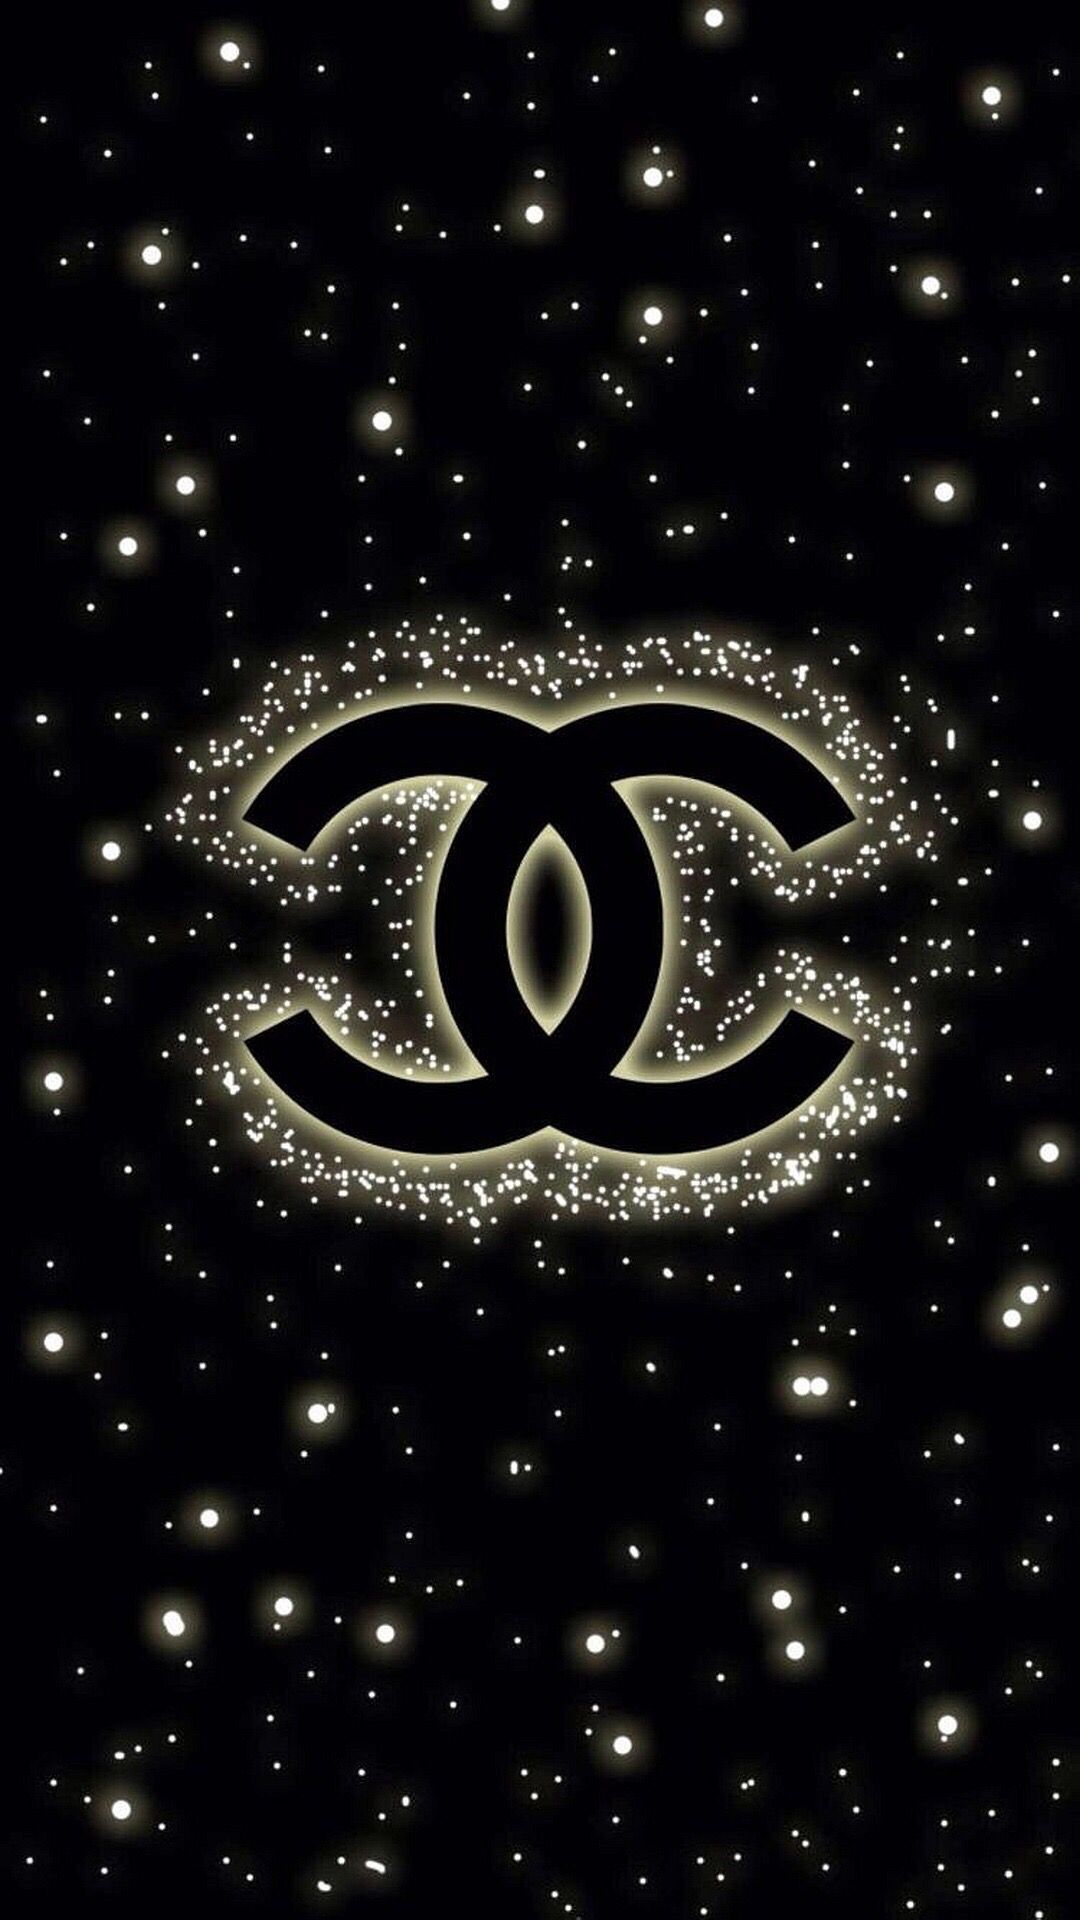 Coco Chanel Logo Iphone Wallpapers On Wallpaperdog